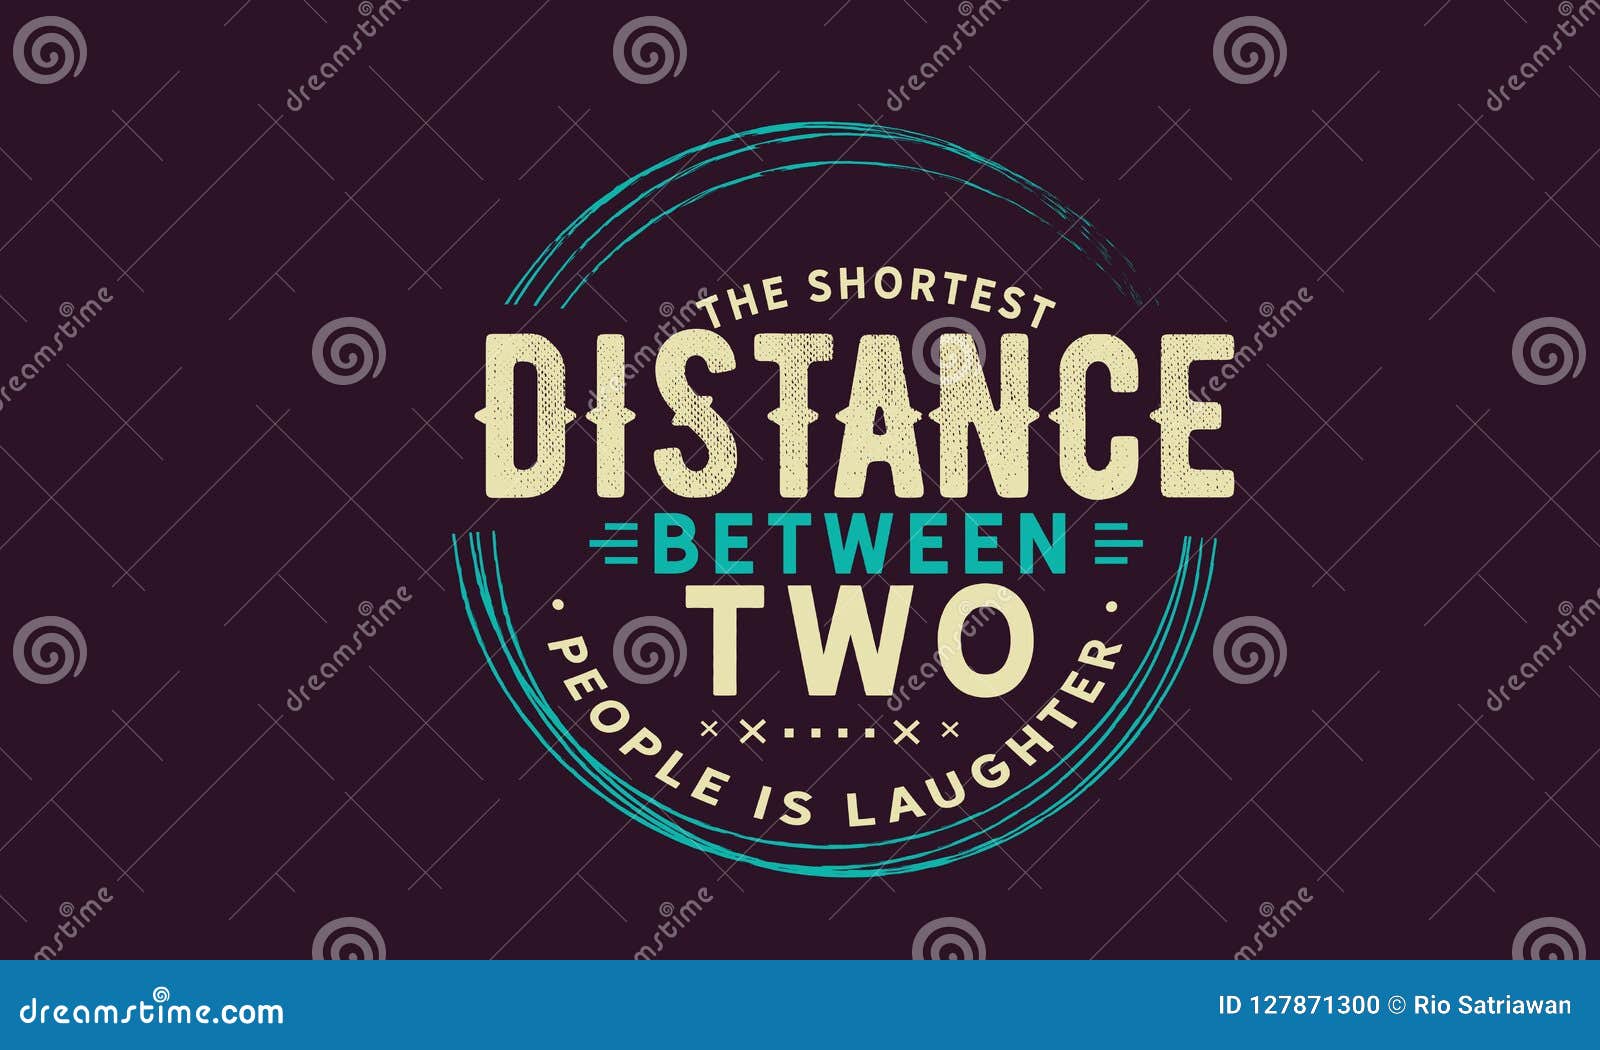 the shortest distance between two people is laughter